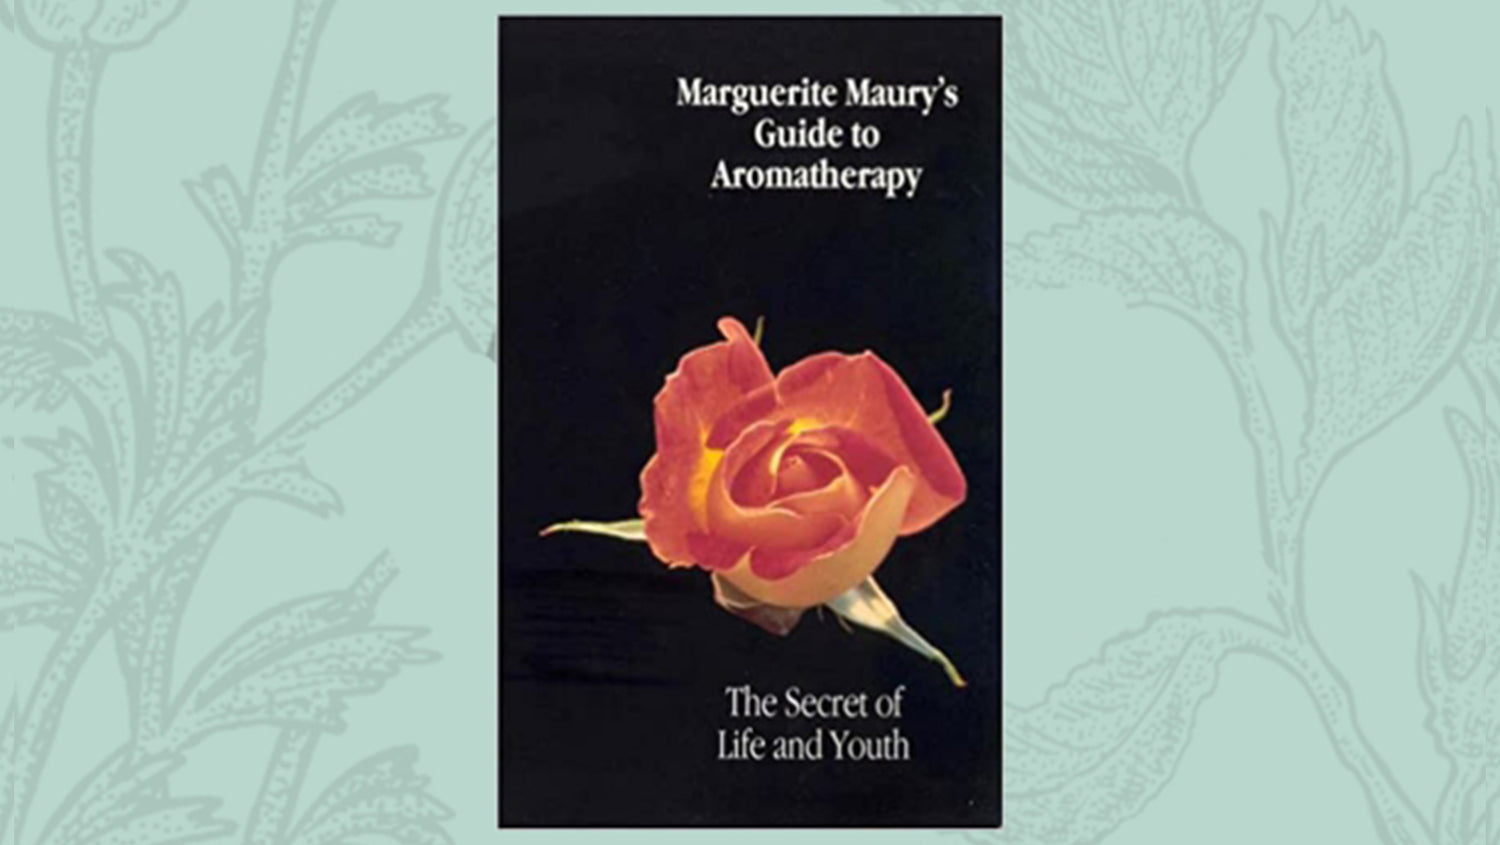 Marguerite maury’s guide to Aromatherapy – the secret of life and youth